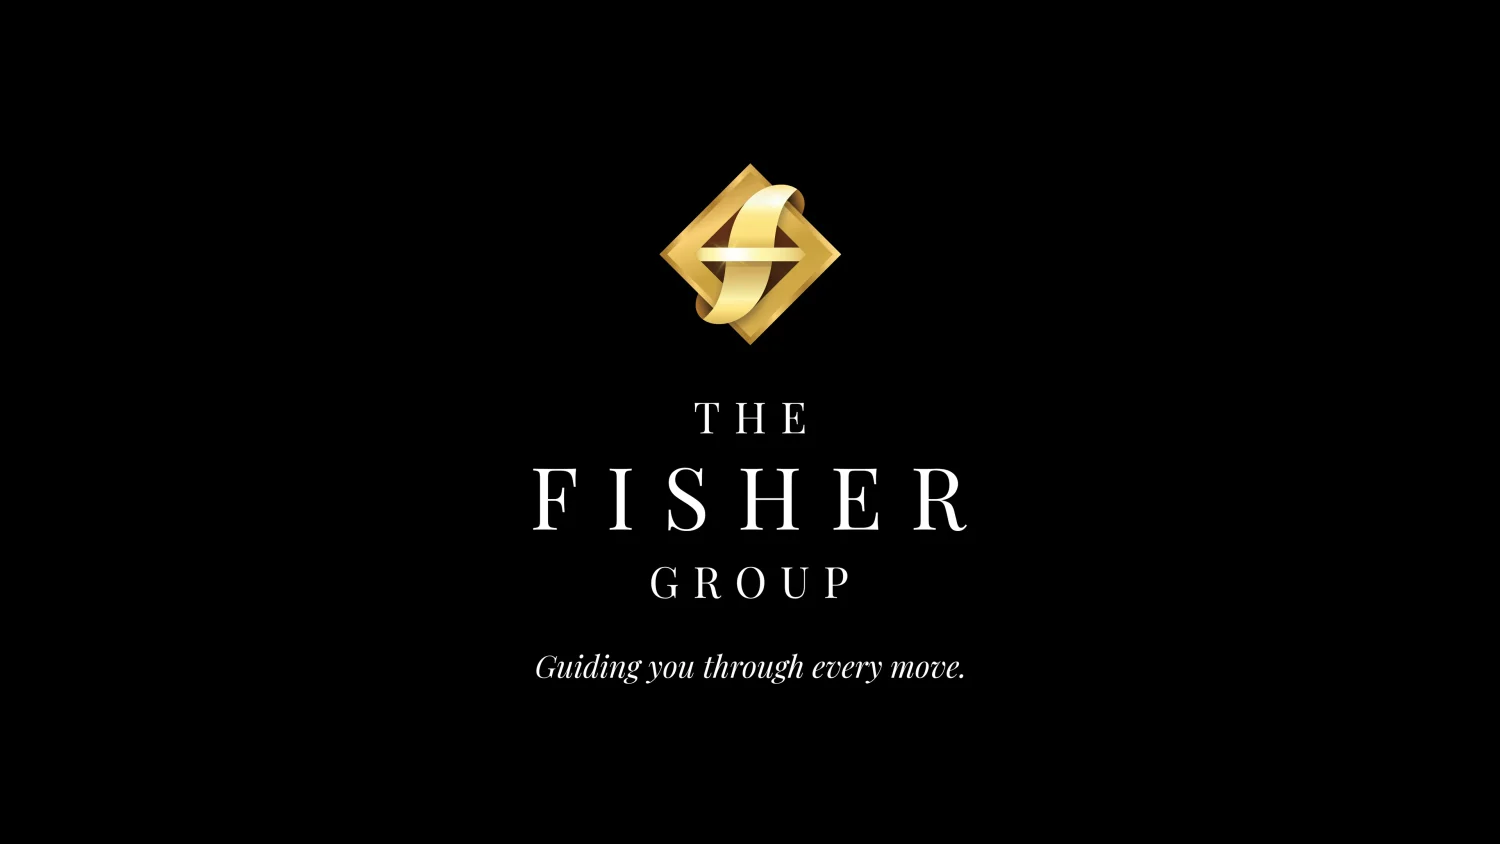 The Fisher Group